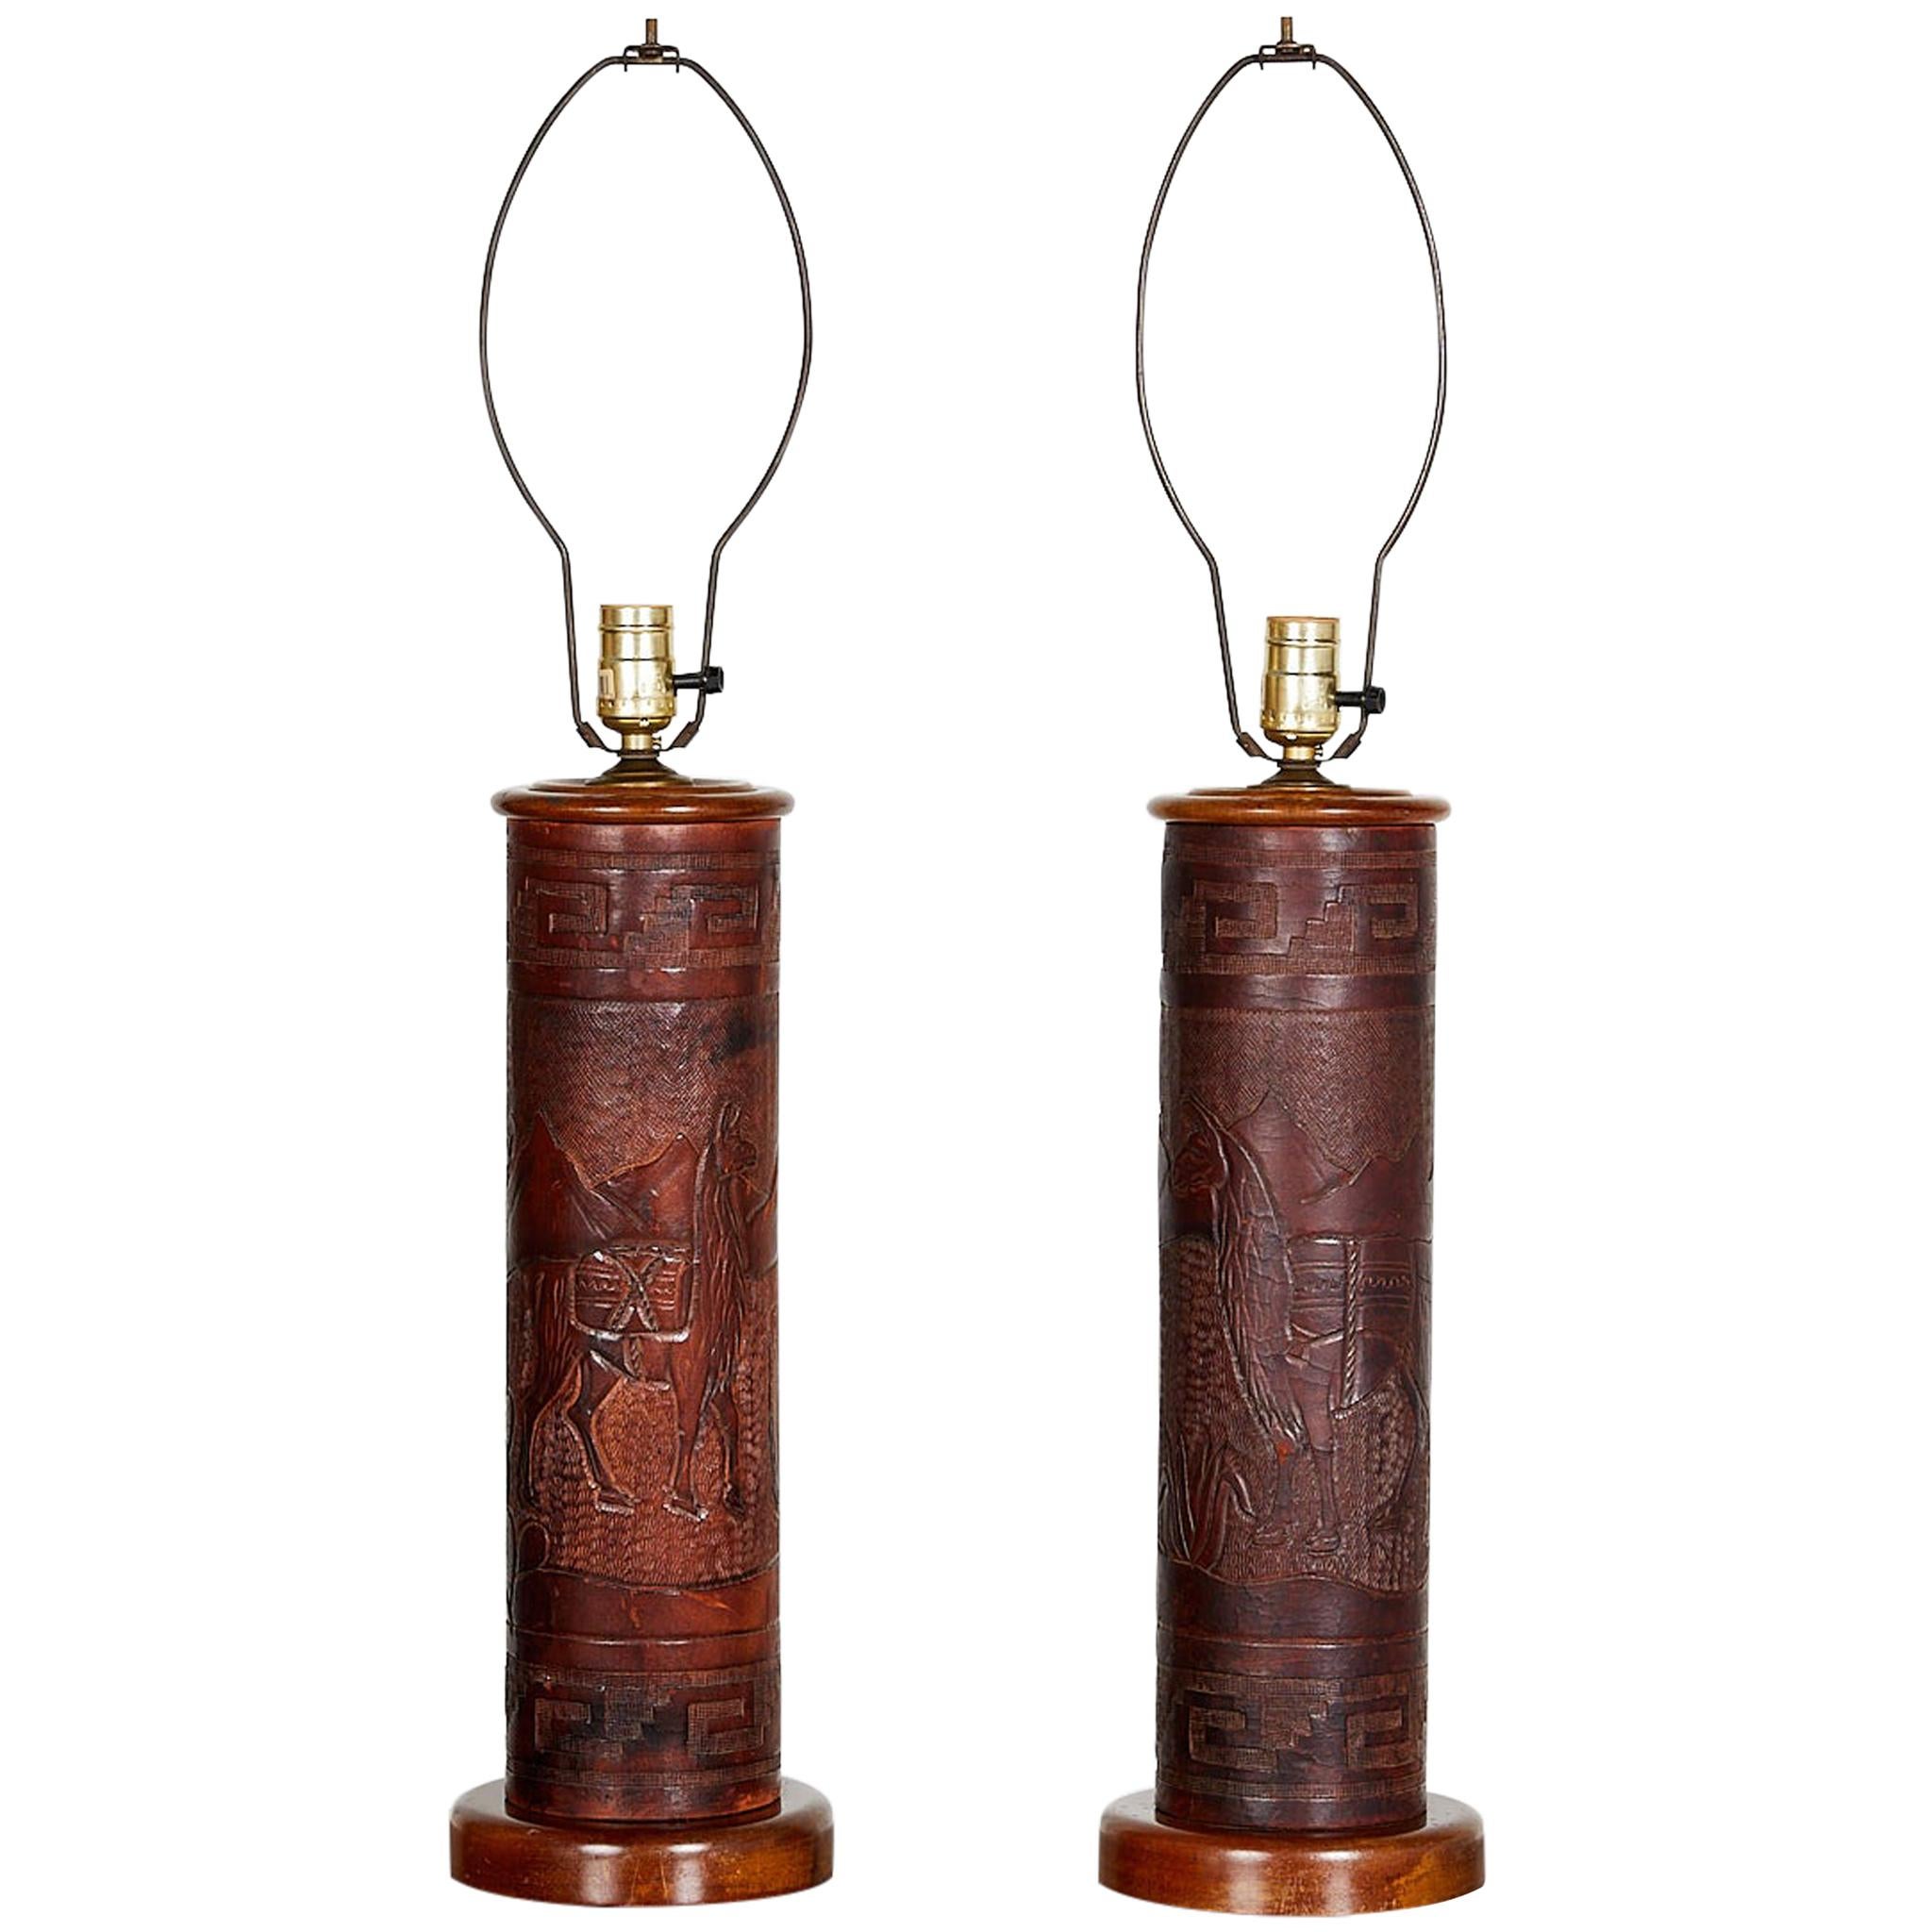 Pair of Vintage Peruvian Leather Lamps with Llama and Greek Key Decorations For Sale